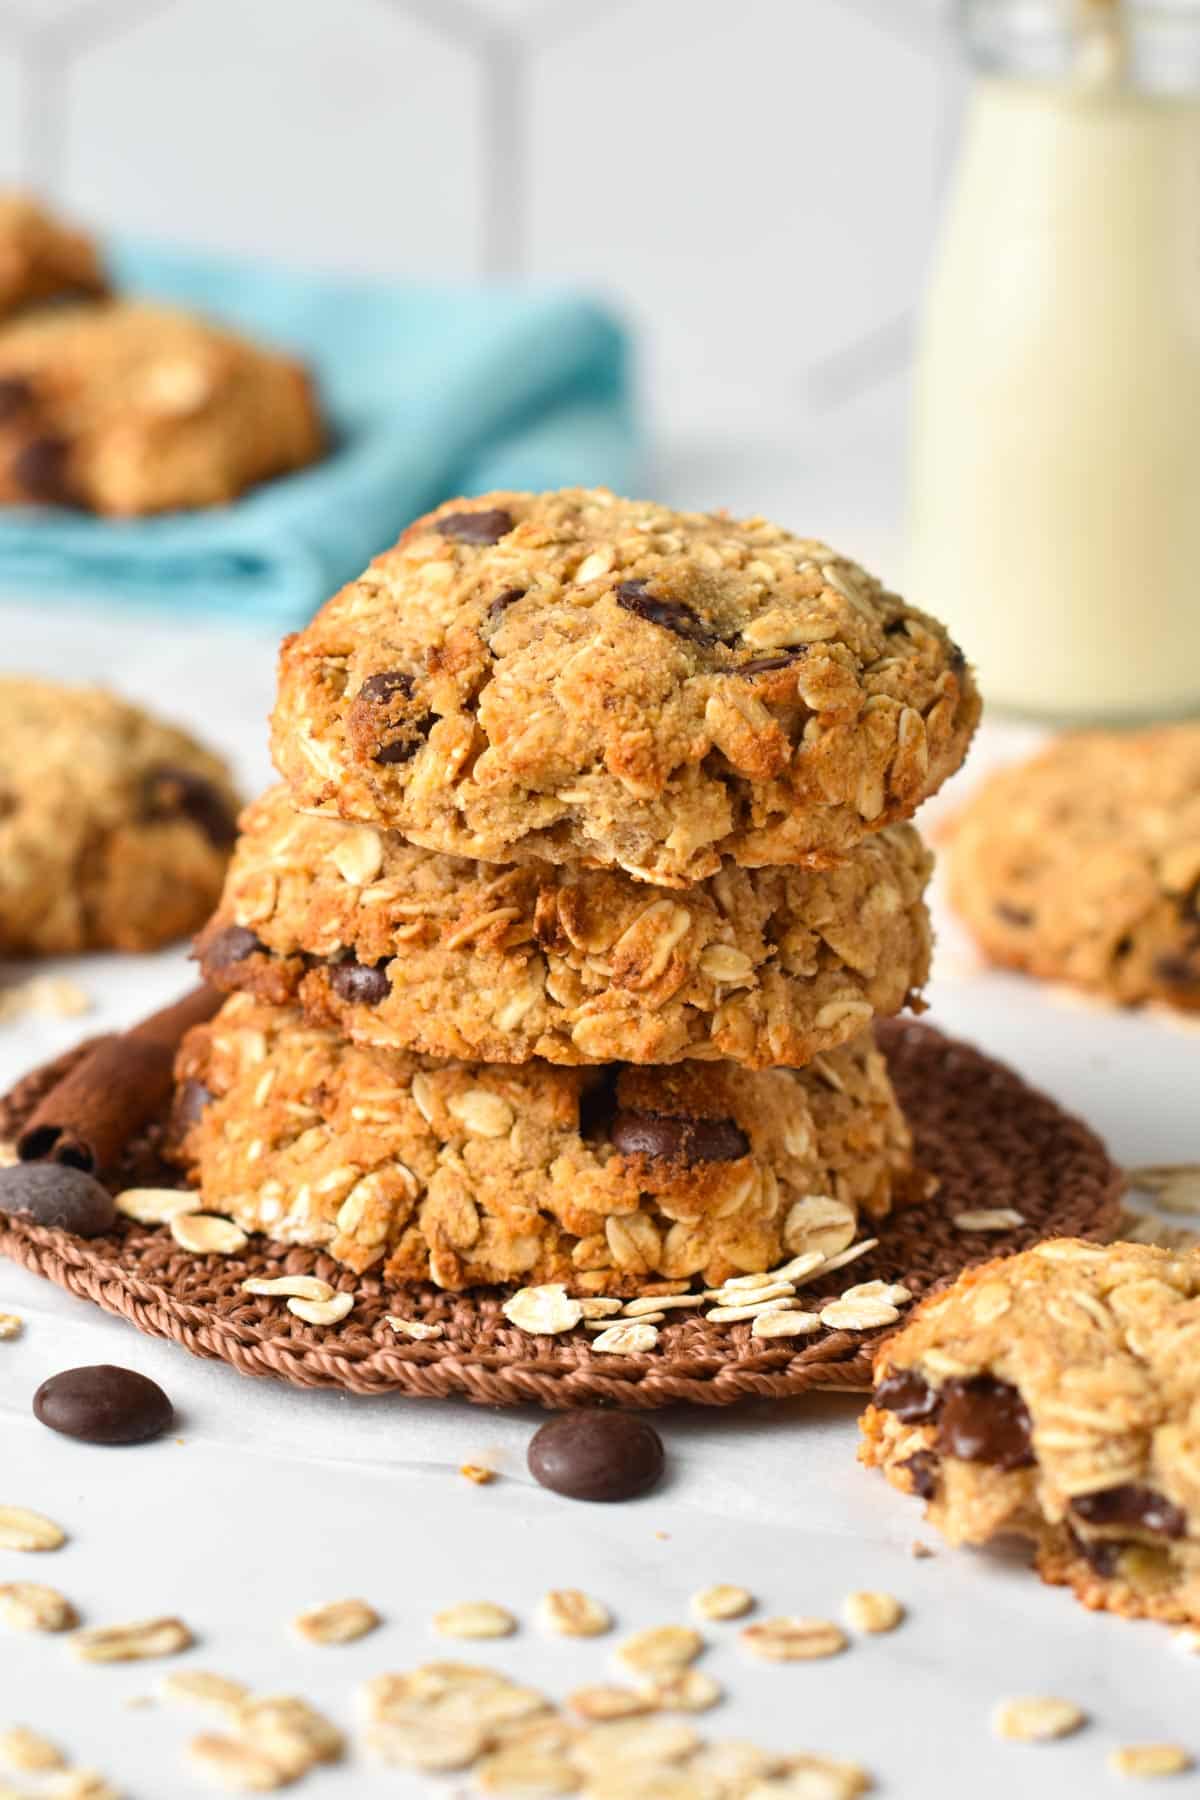 These Coconut Flour Oatmeal Cookies are easy healthy gluten-free oatmeal cookies made from coconut flour and oats. They are packed with fiber, nutrients, and a delicious healthy breakfast cookie recipe.